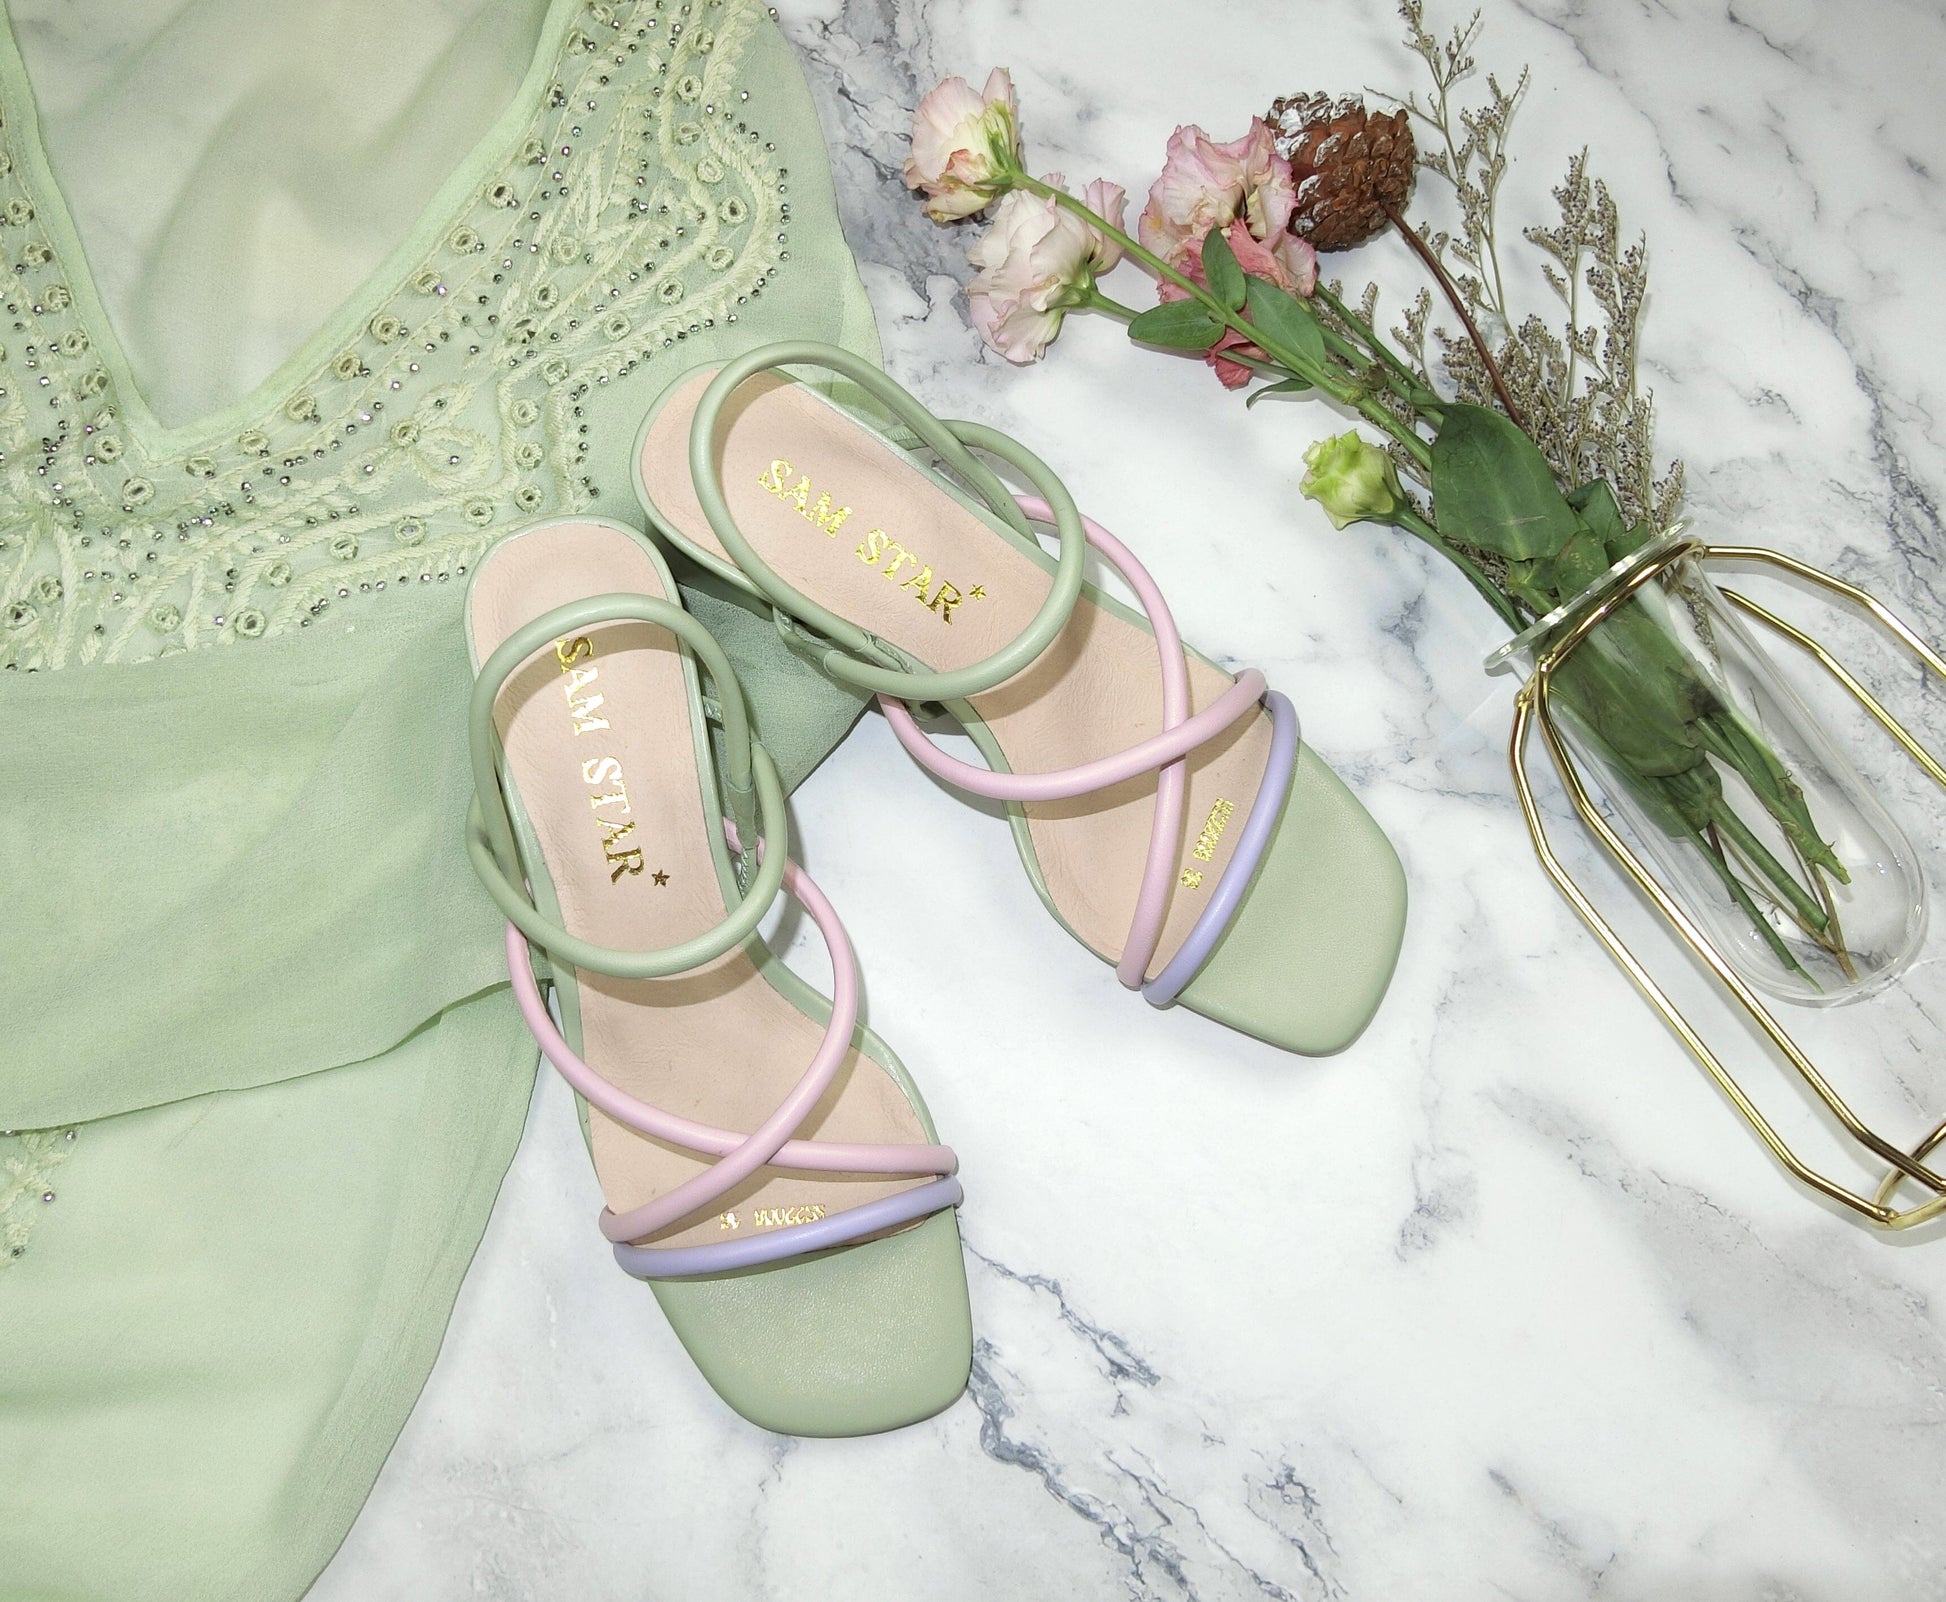 SS22007 Genuine leather strappy block heel sandals in mint, pink and lilac sandals Sam Star Shoes Mint.PInk.Lilac 40/7 